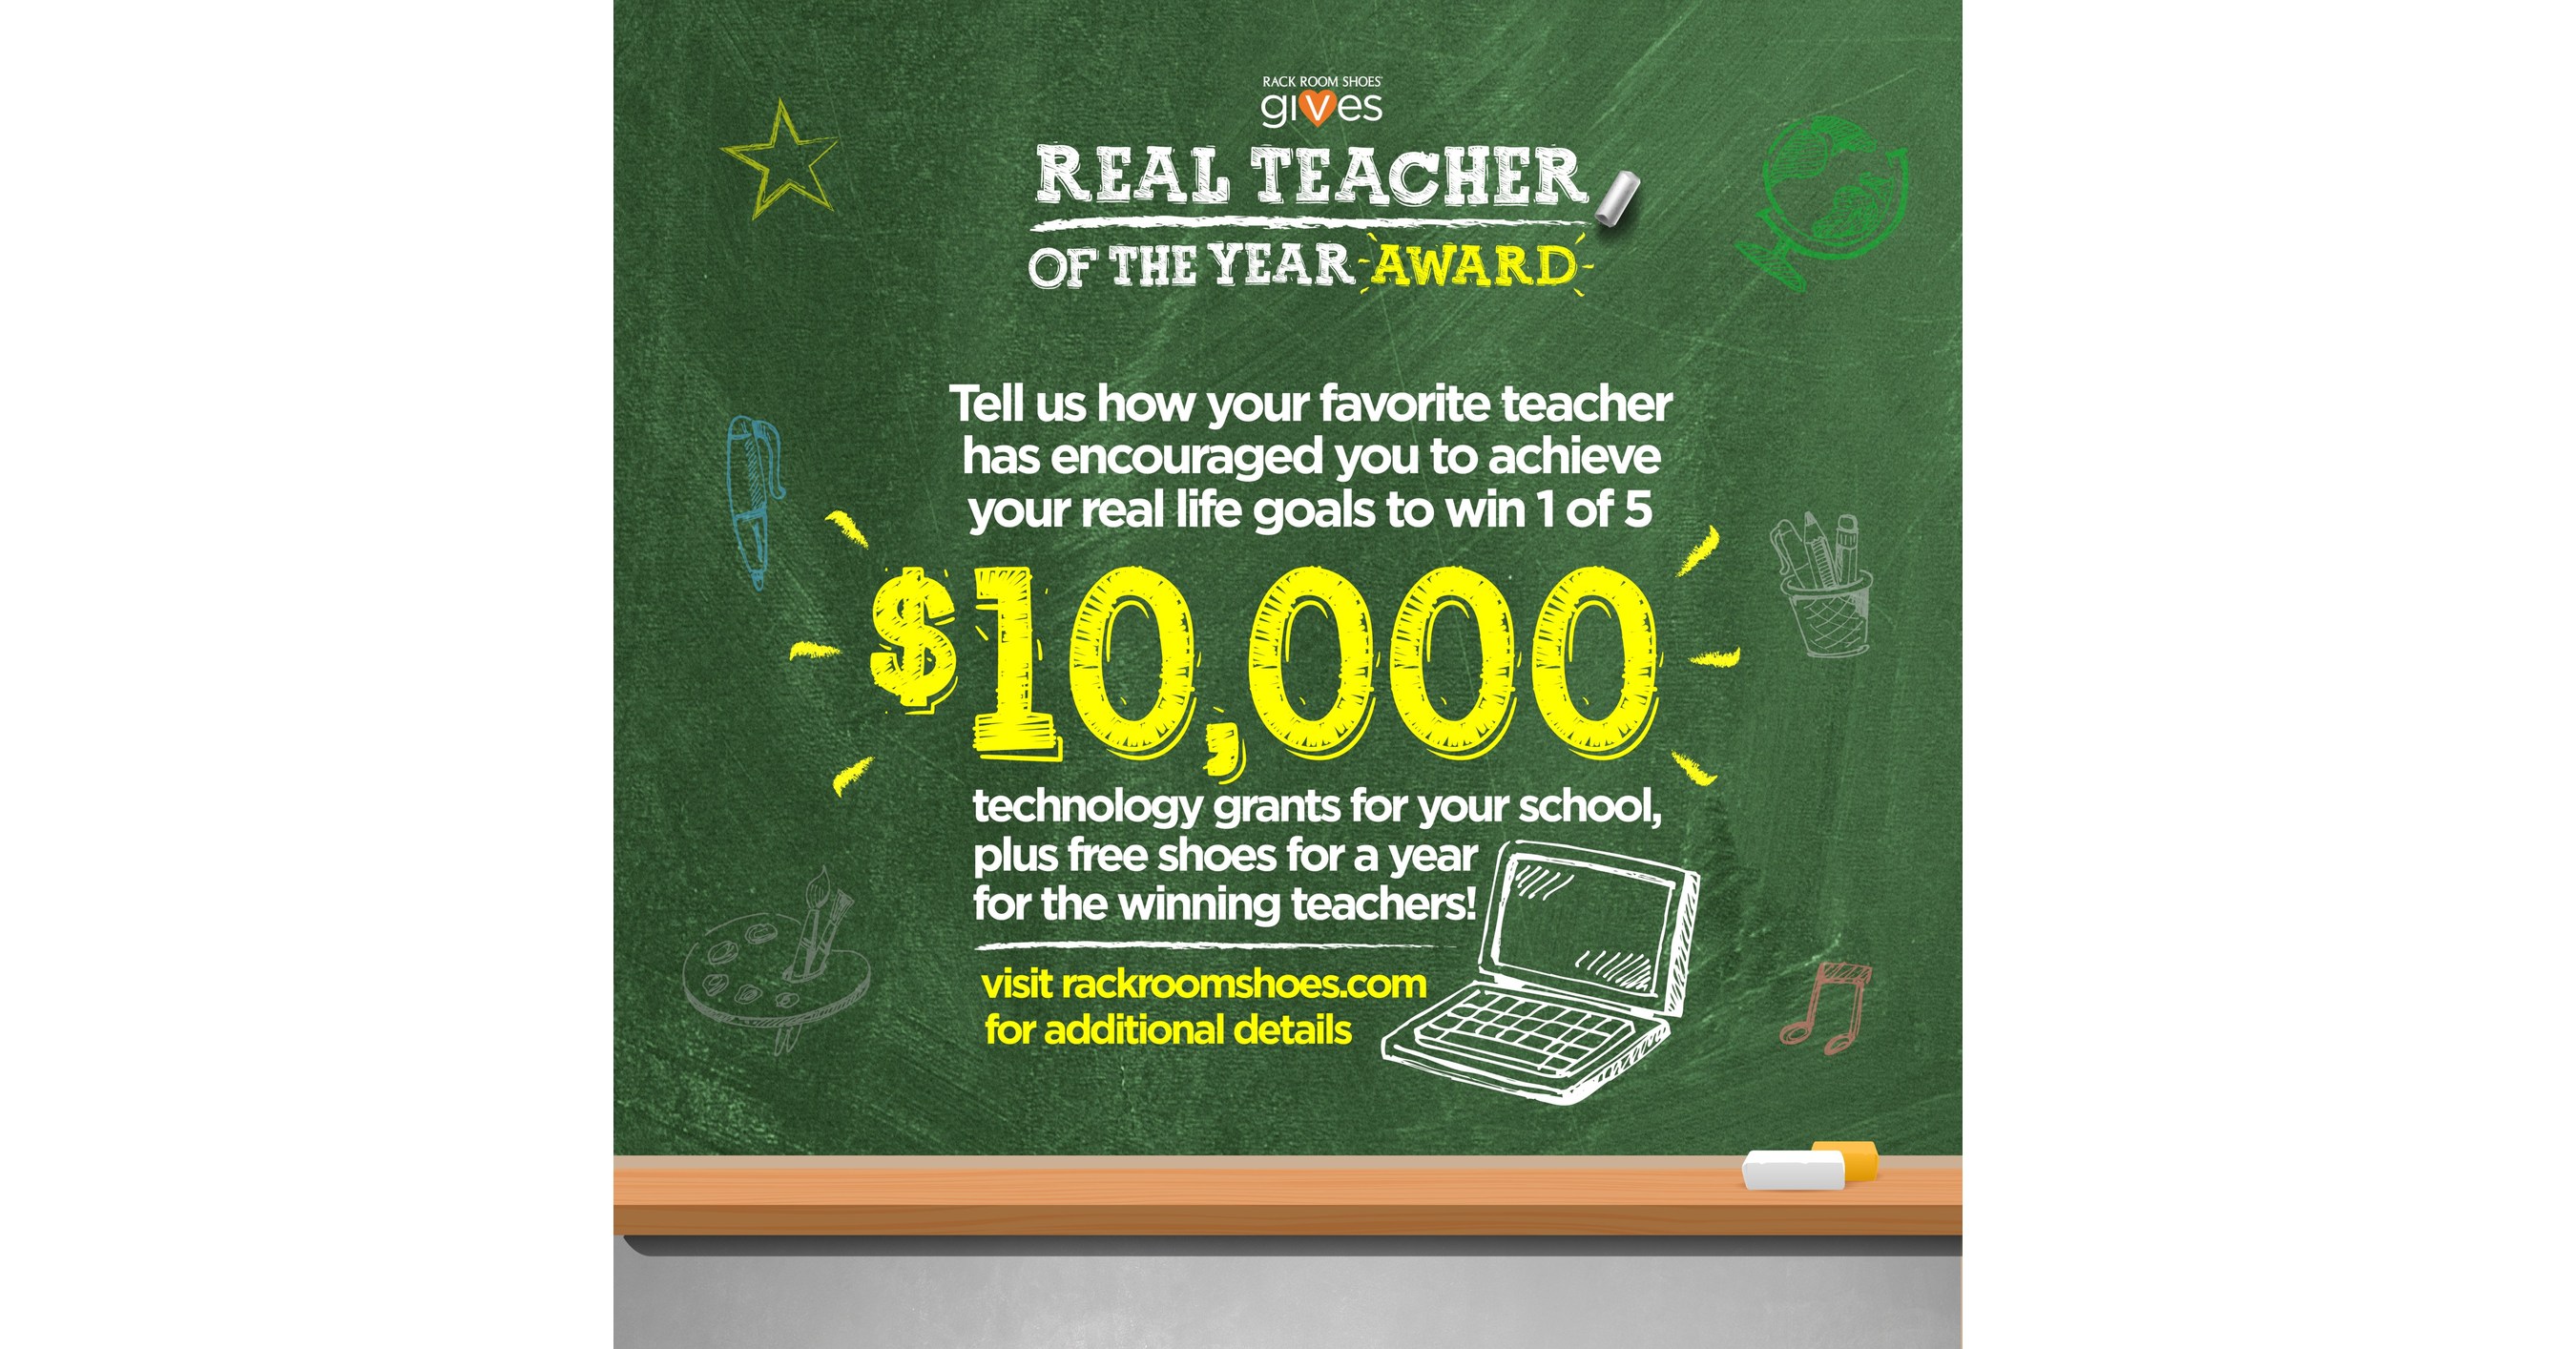 Rack Room Shoes Announces 2019 Real Teacher Of The Year Contest